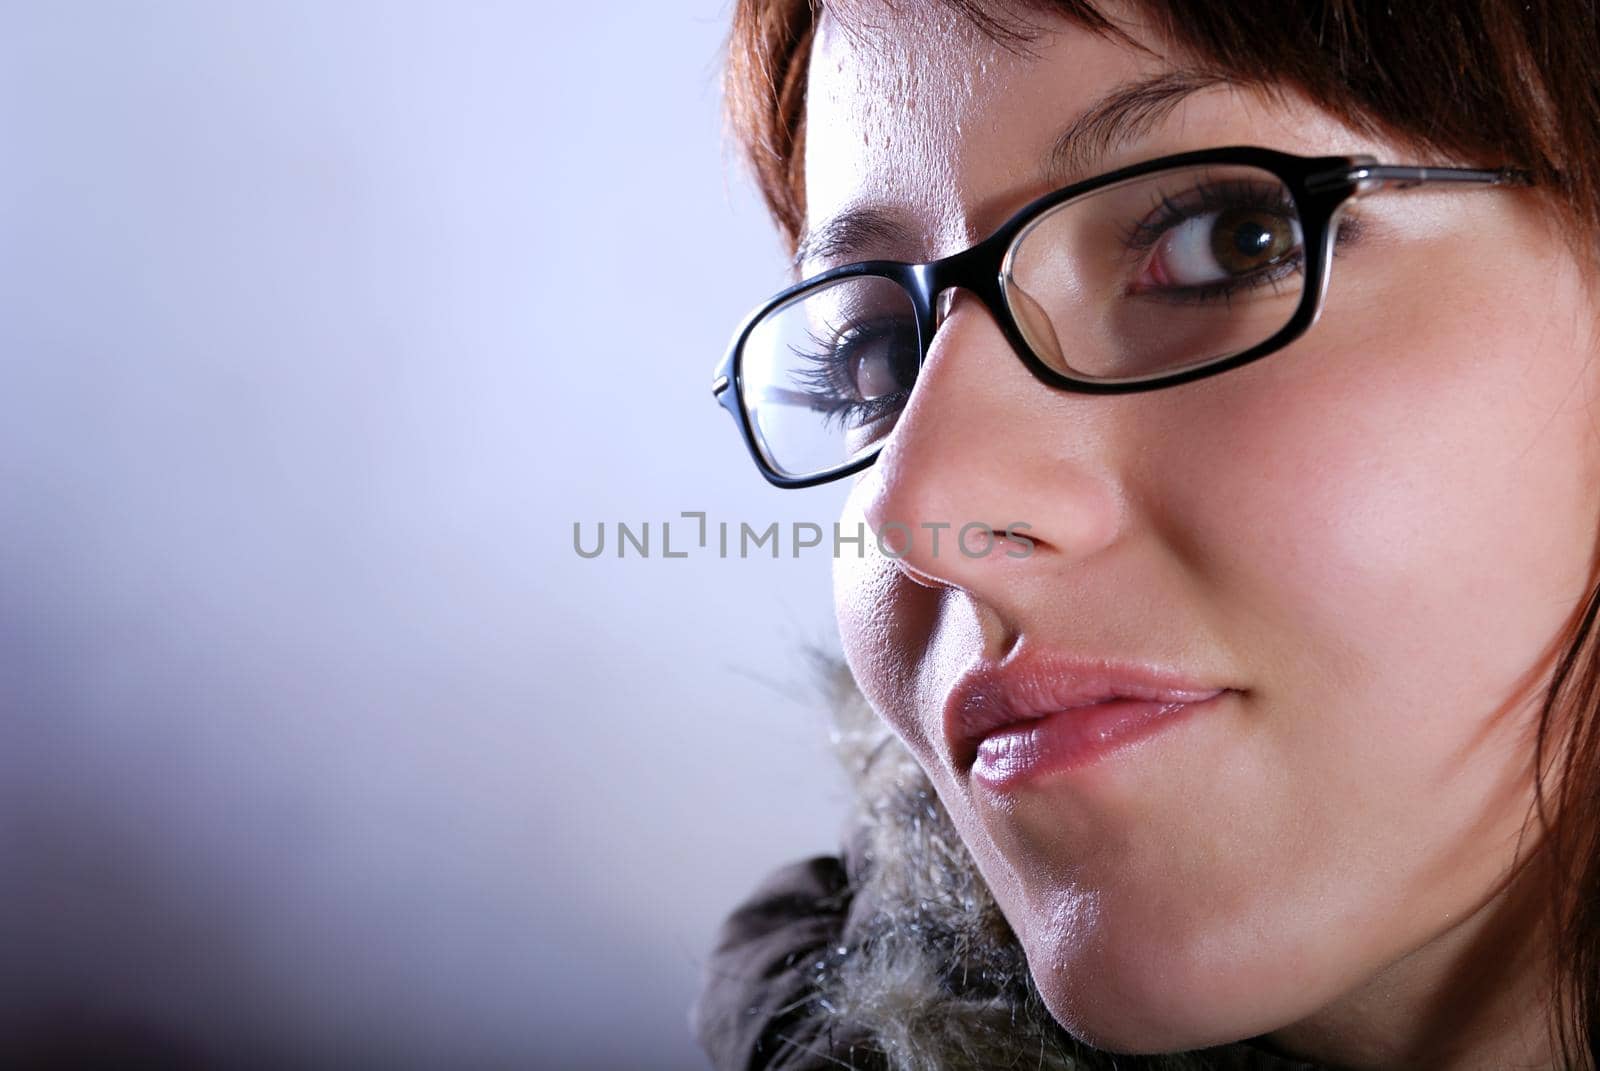 Portrai of a young woman wearing glasses by dotshock